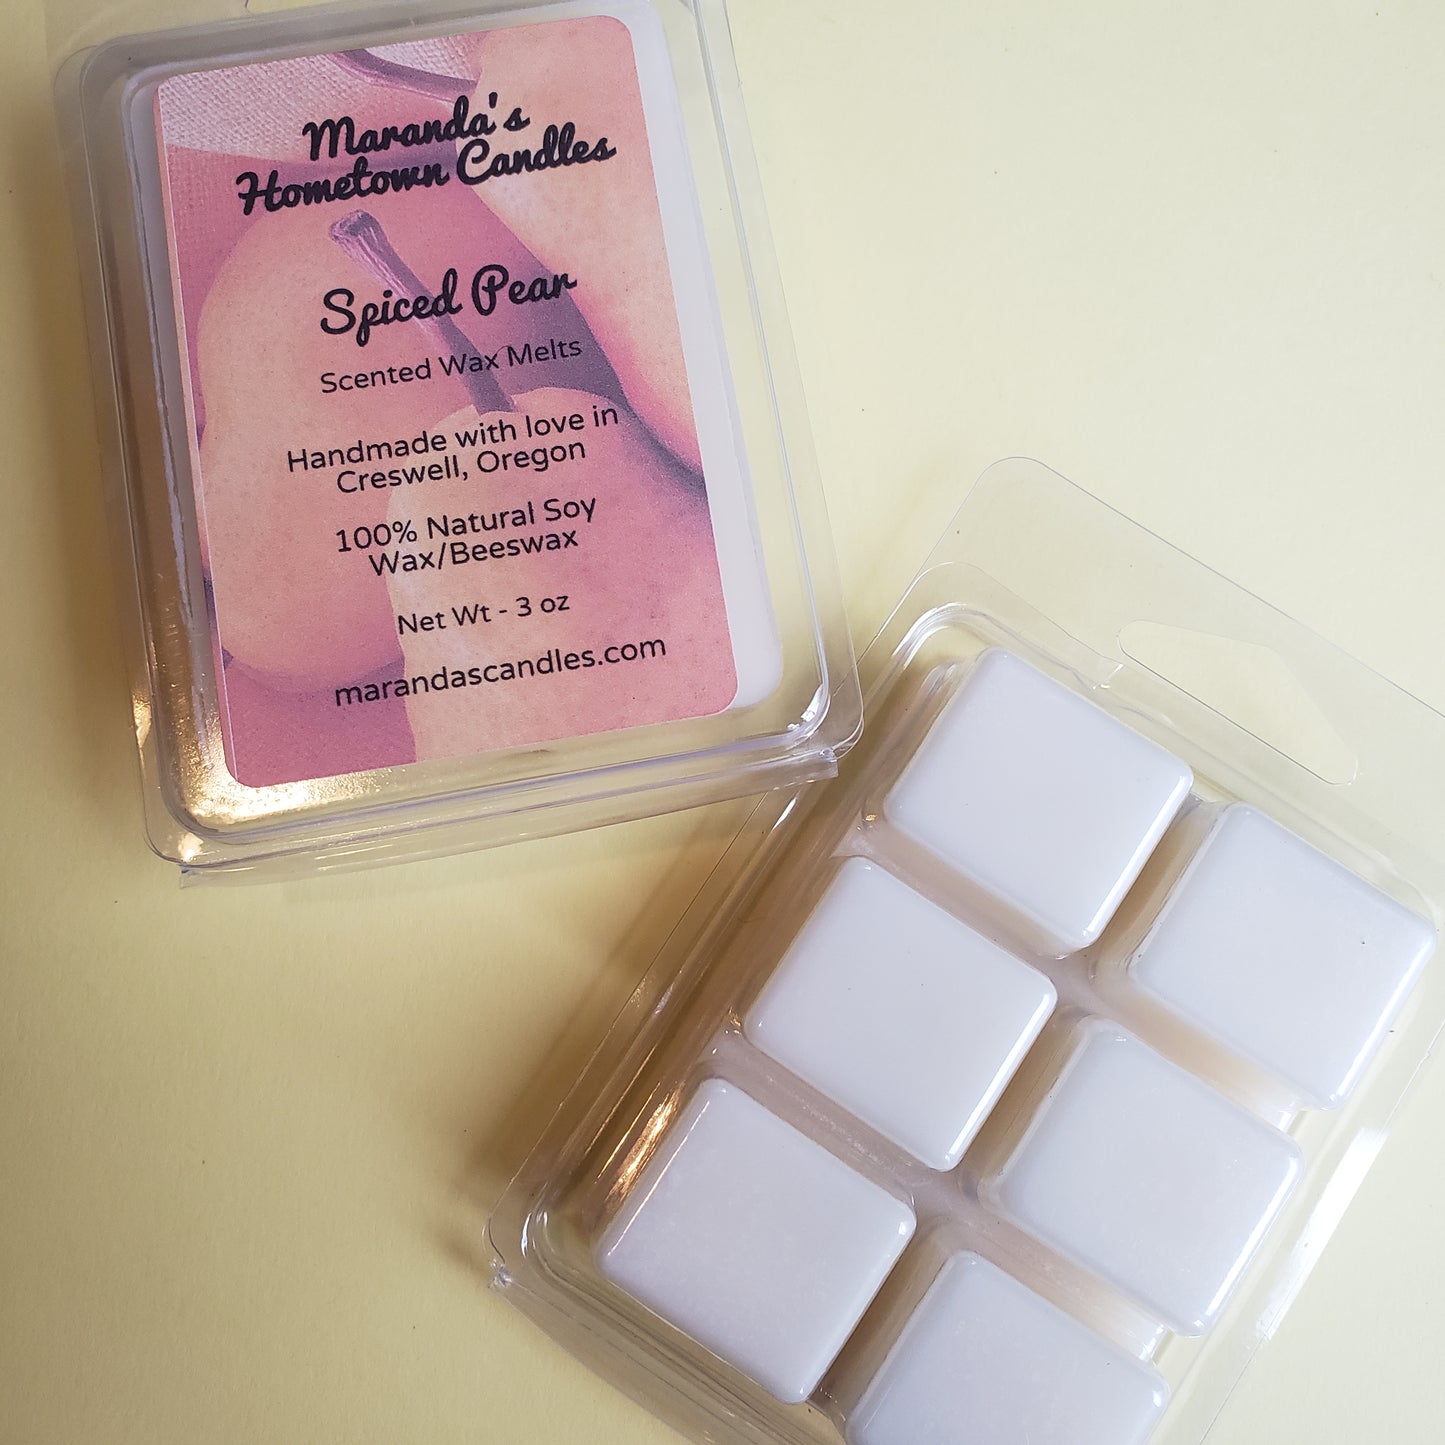 Spiced Pear Scented Soy Wax Candle/Wax Melts